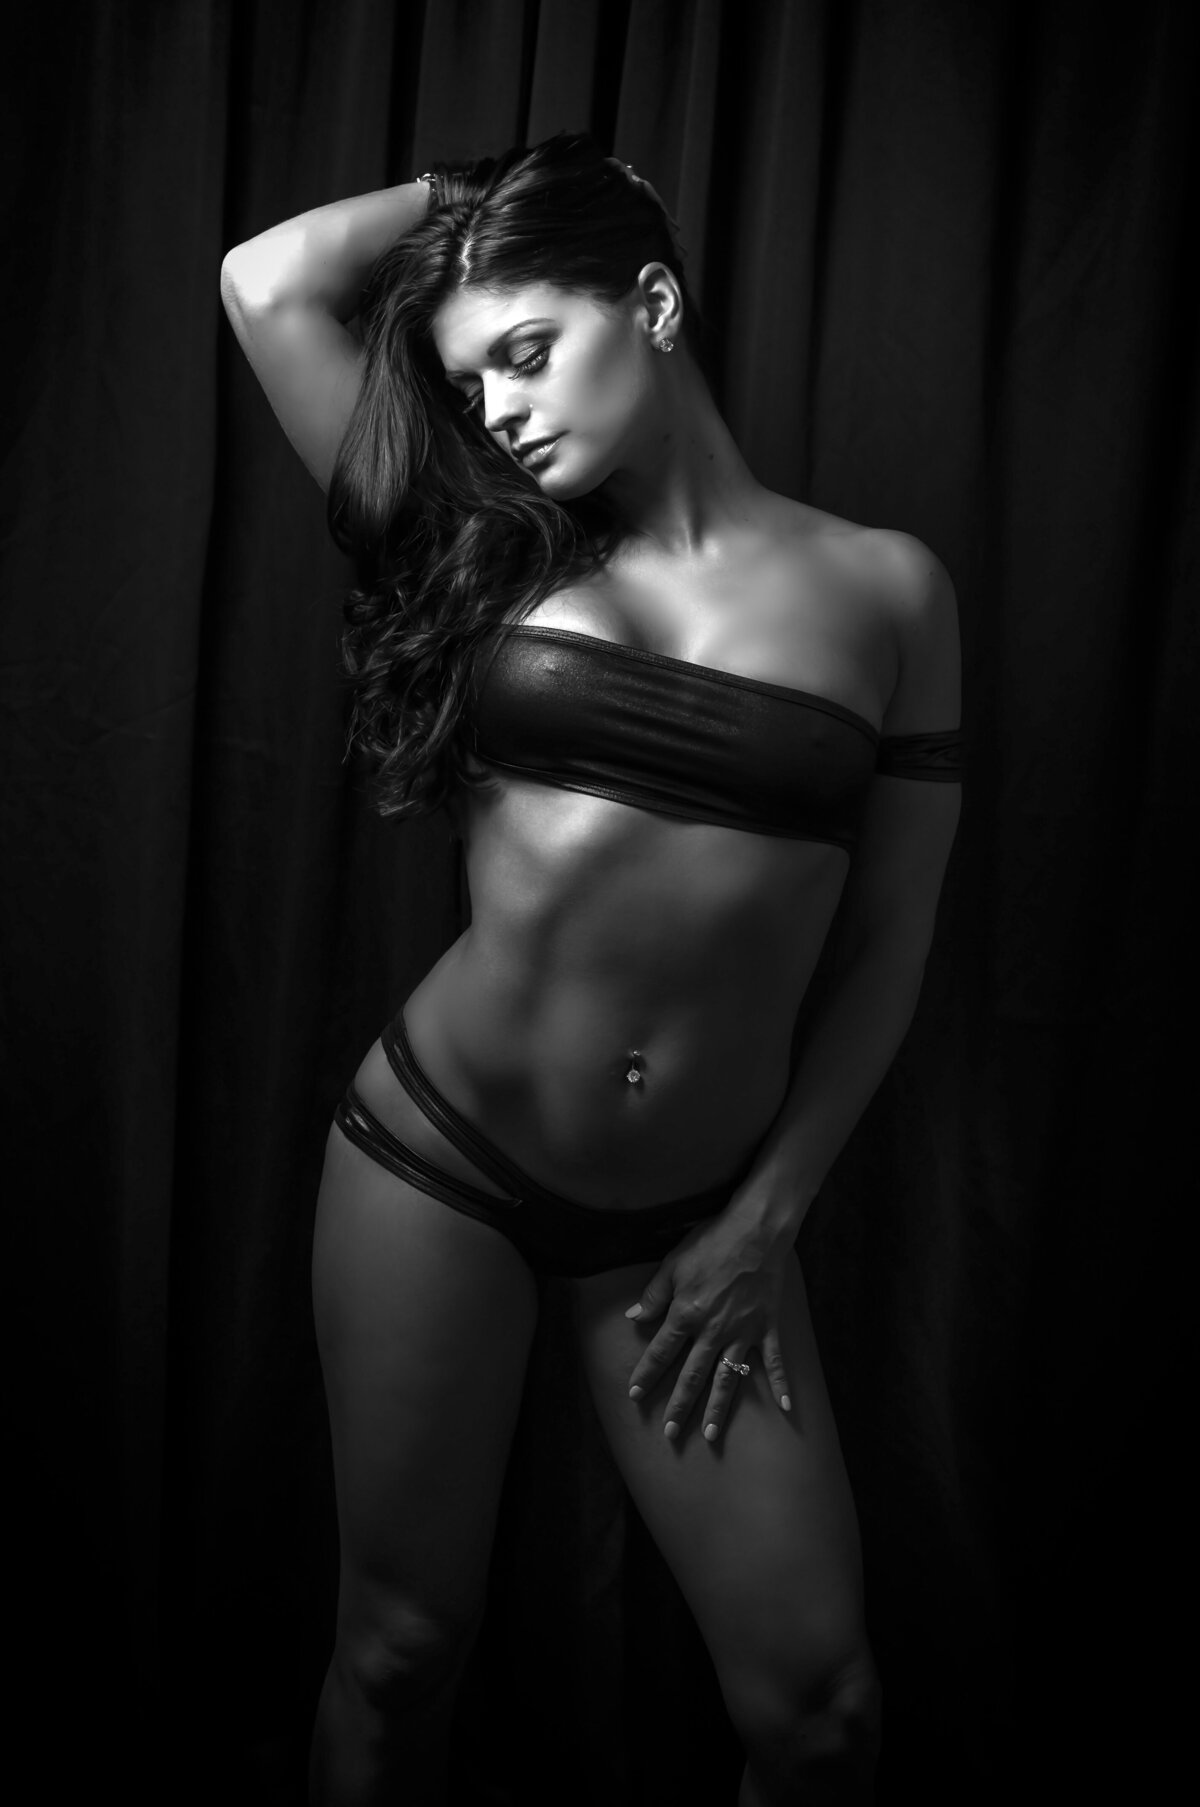 Woman posing in leather in black and white boudoir photo